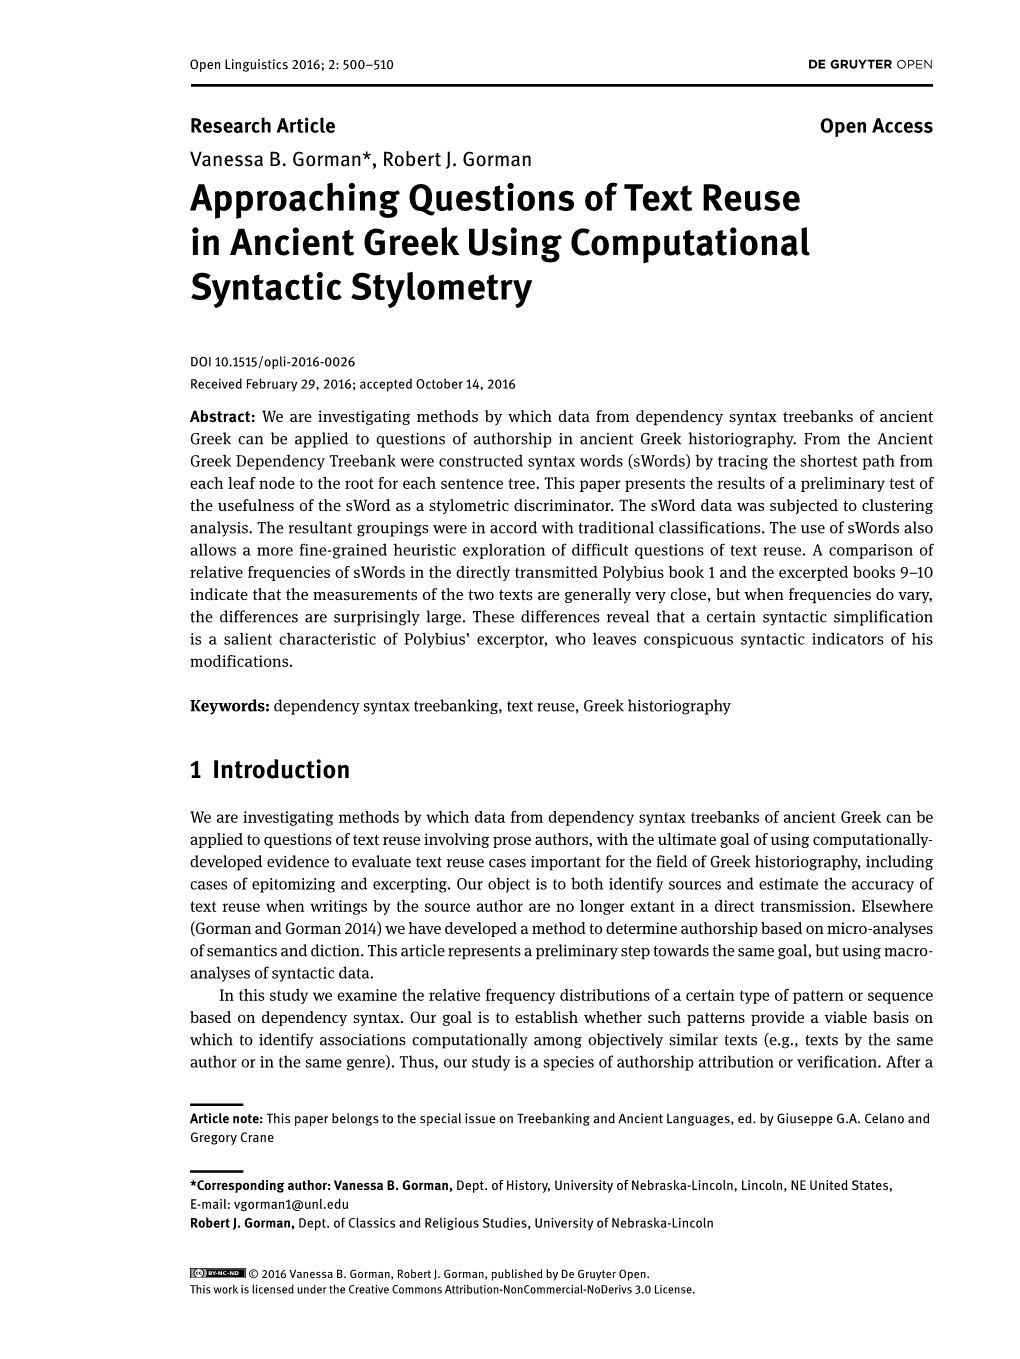 Approaching Questions of Text Reuse in Ancient Greek Using Computational Syntactic Stylometry